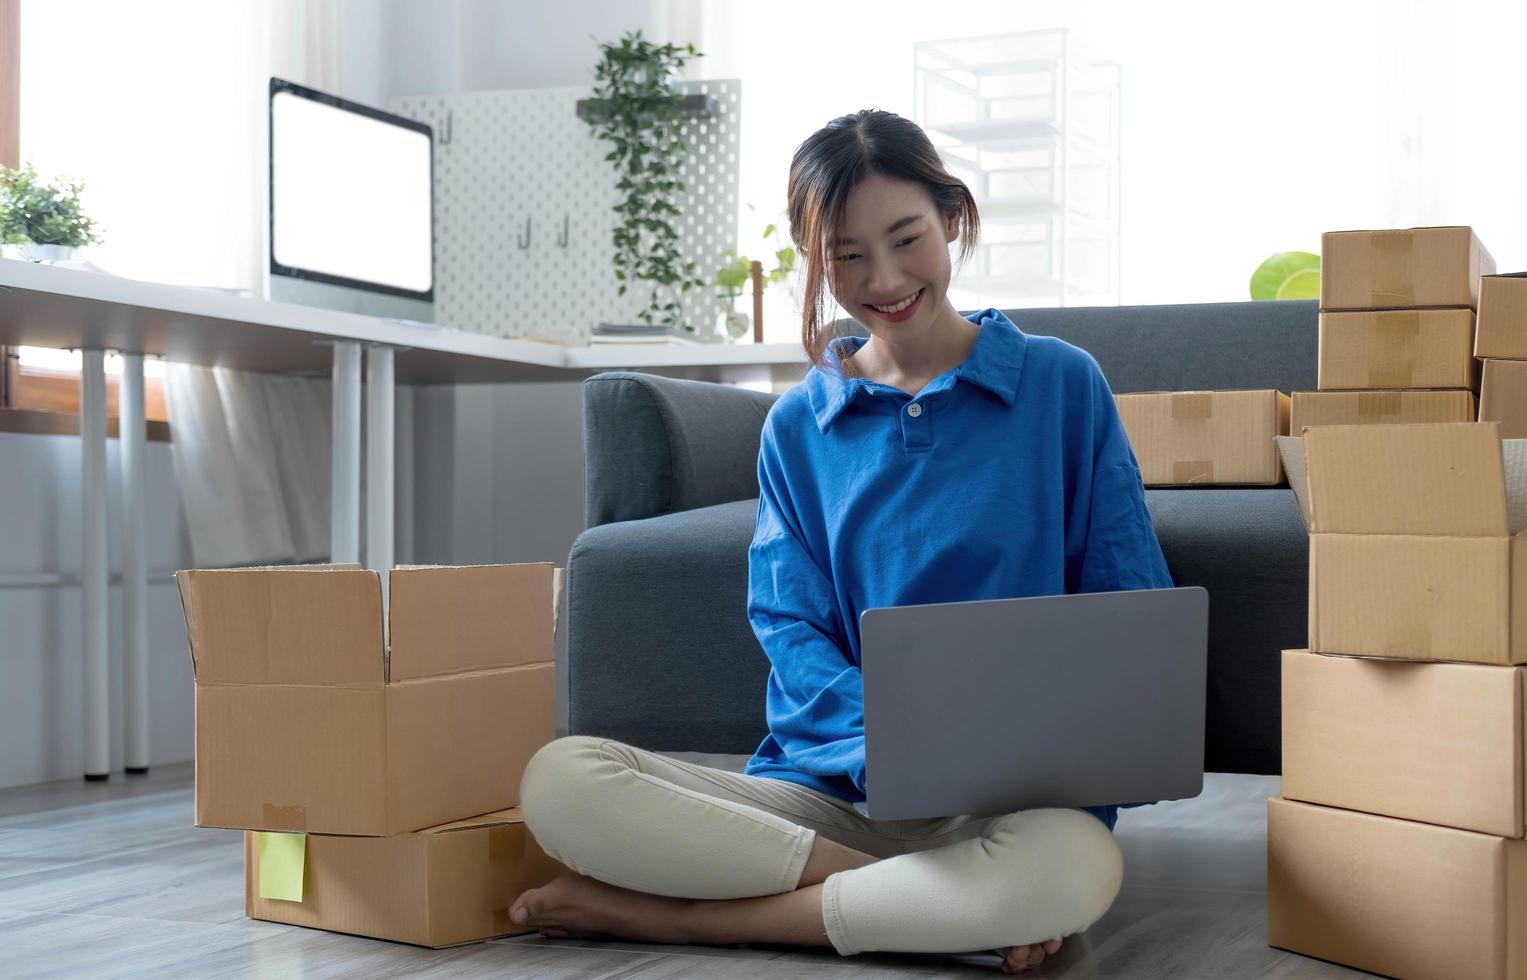 Starting Small business entrepreneur freelance,Portrait young woman working at home office, BOX,smartphone,laptop, online, marketing, packaging, delivery, SME, e-commerce concept photo